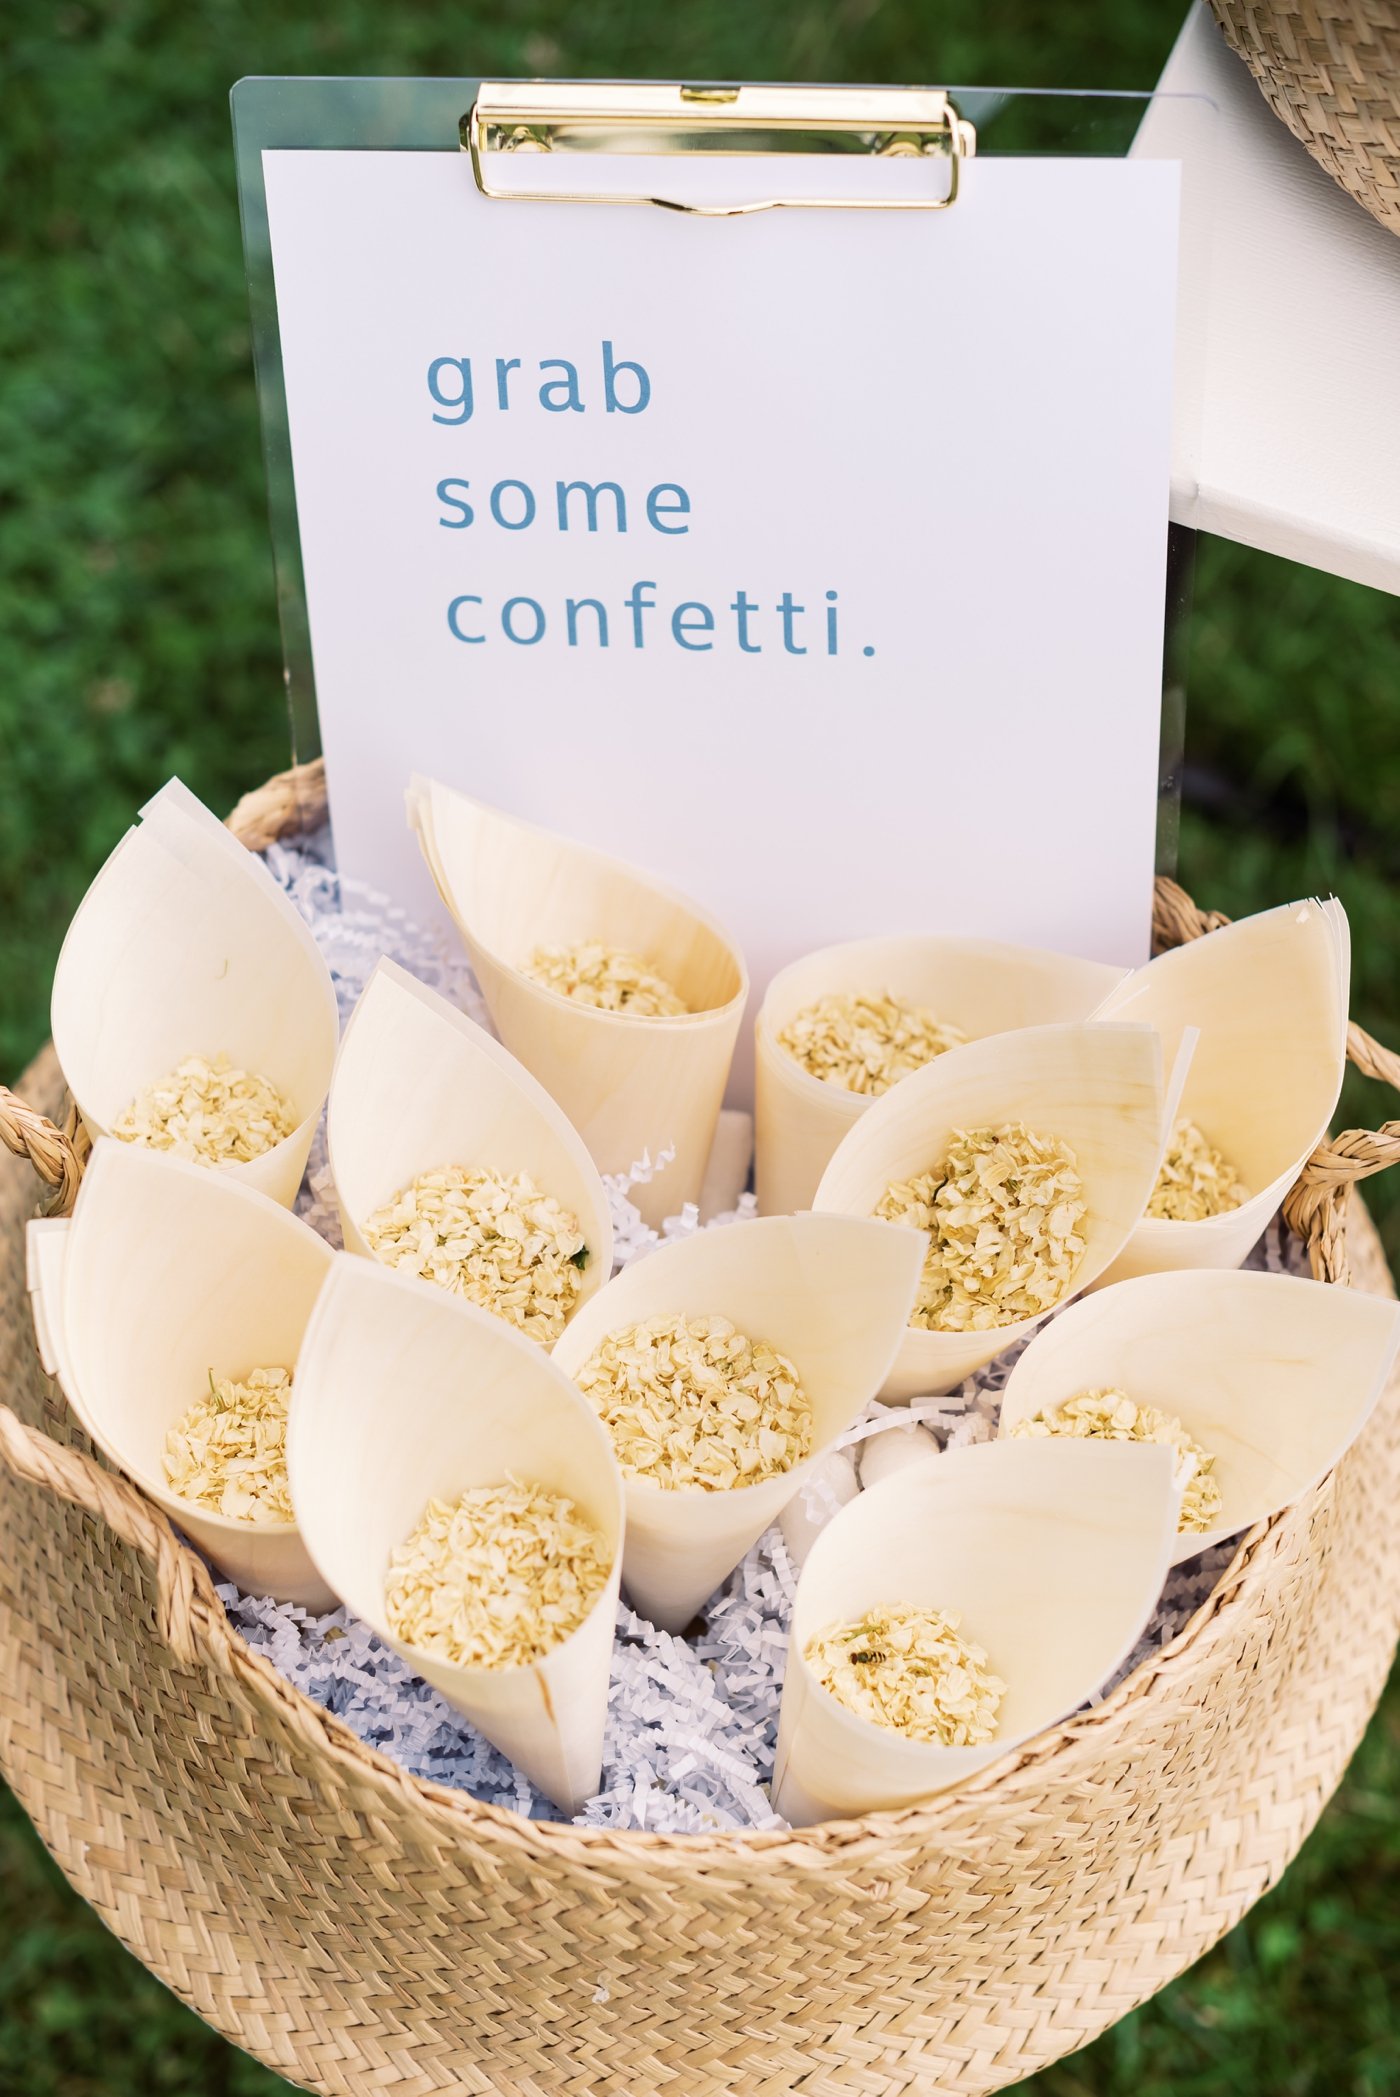 Woven seagrass basket filled with confetti cones at a wedding ceremony